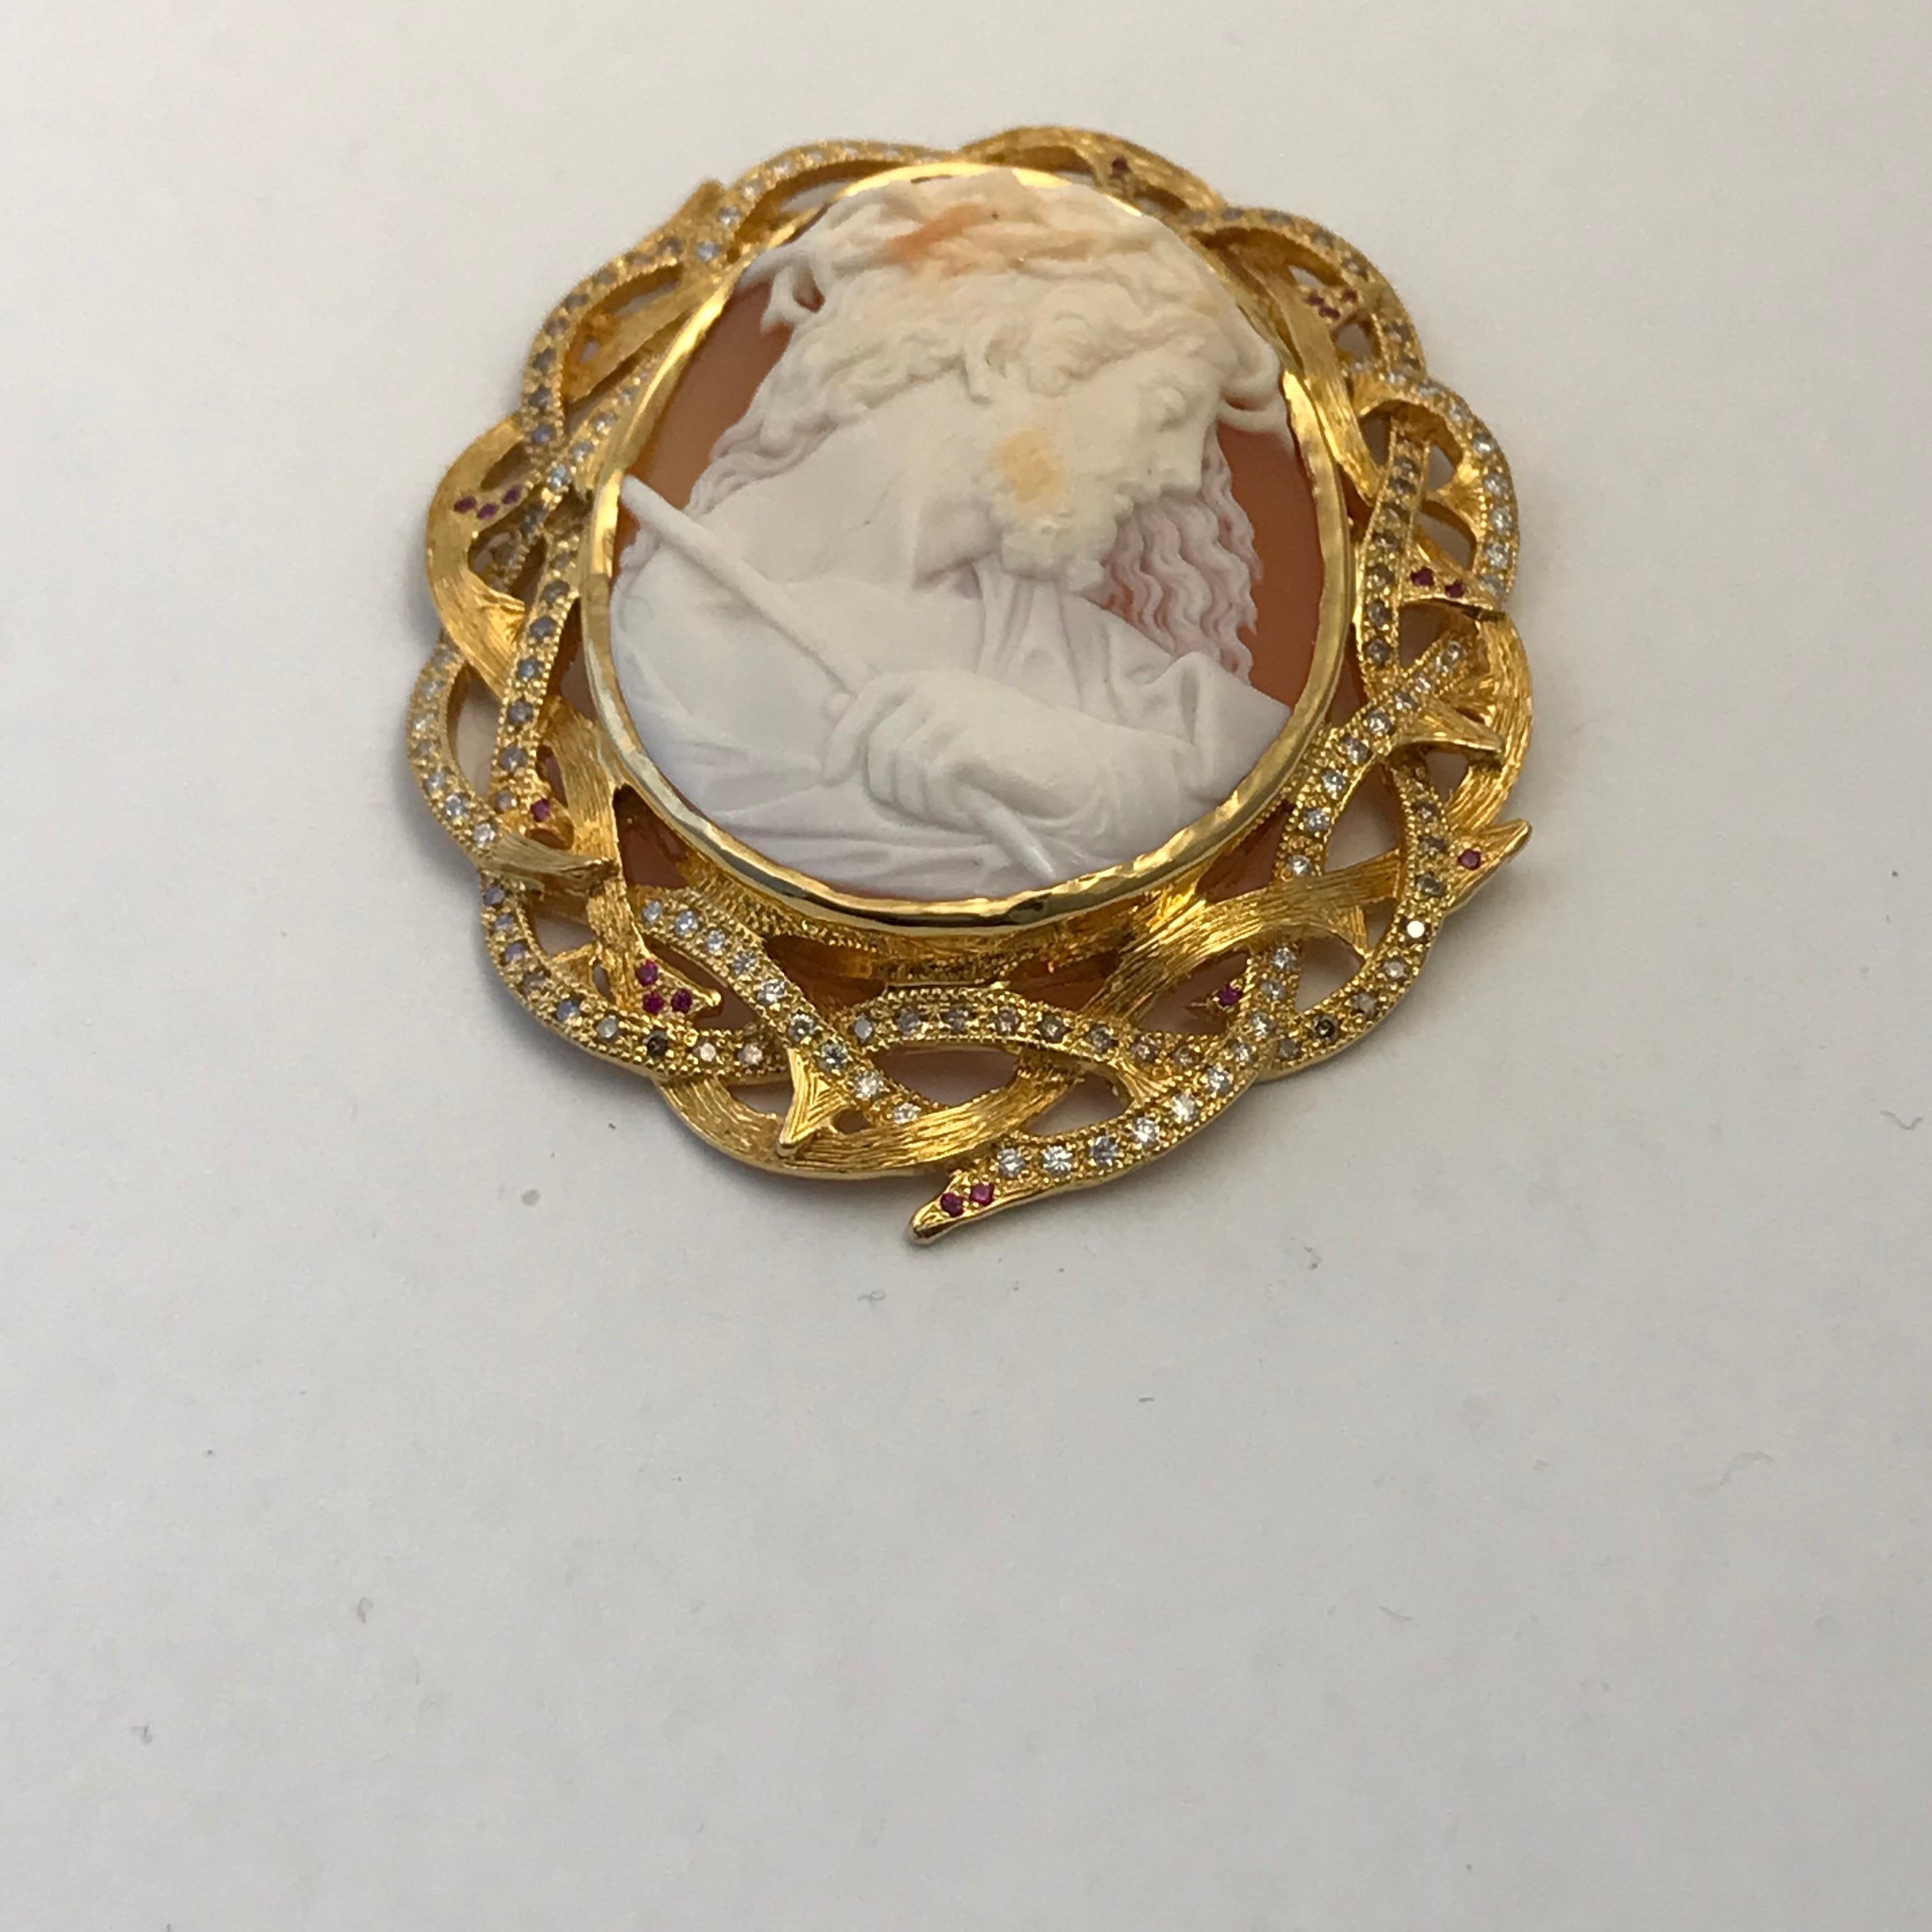 Cameo 1890s Jesus Set in 14 Karat Gold with Diamonds, Rubies and Brown Diamonds In New Condition For Sale In Austin, TX